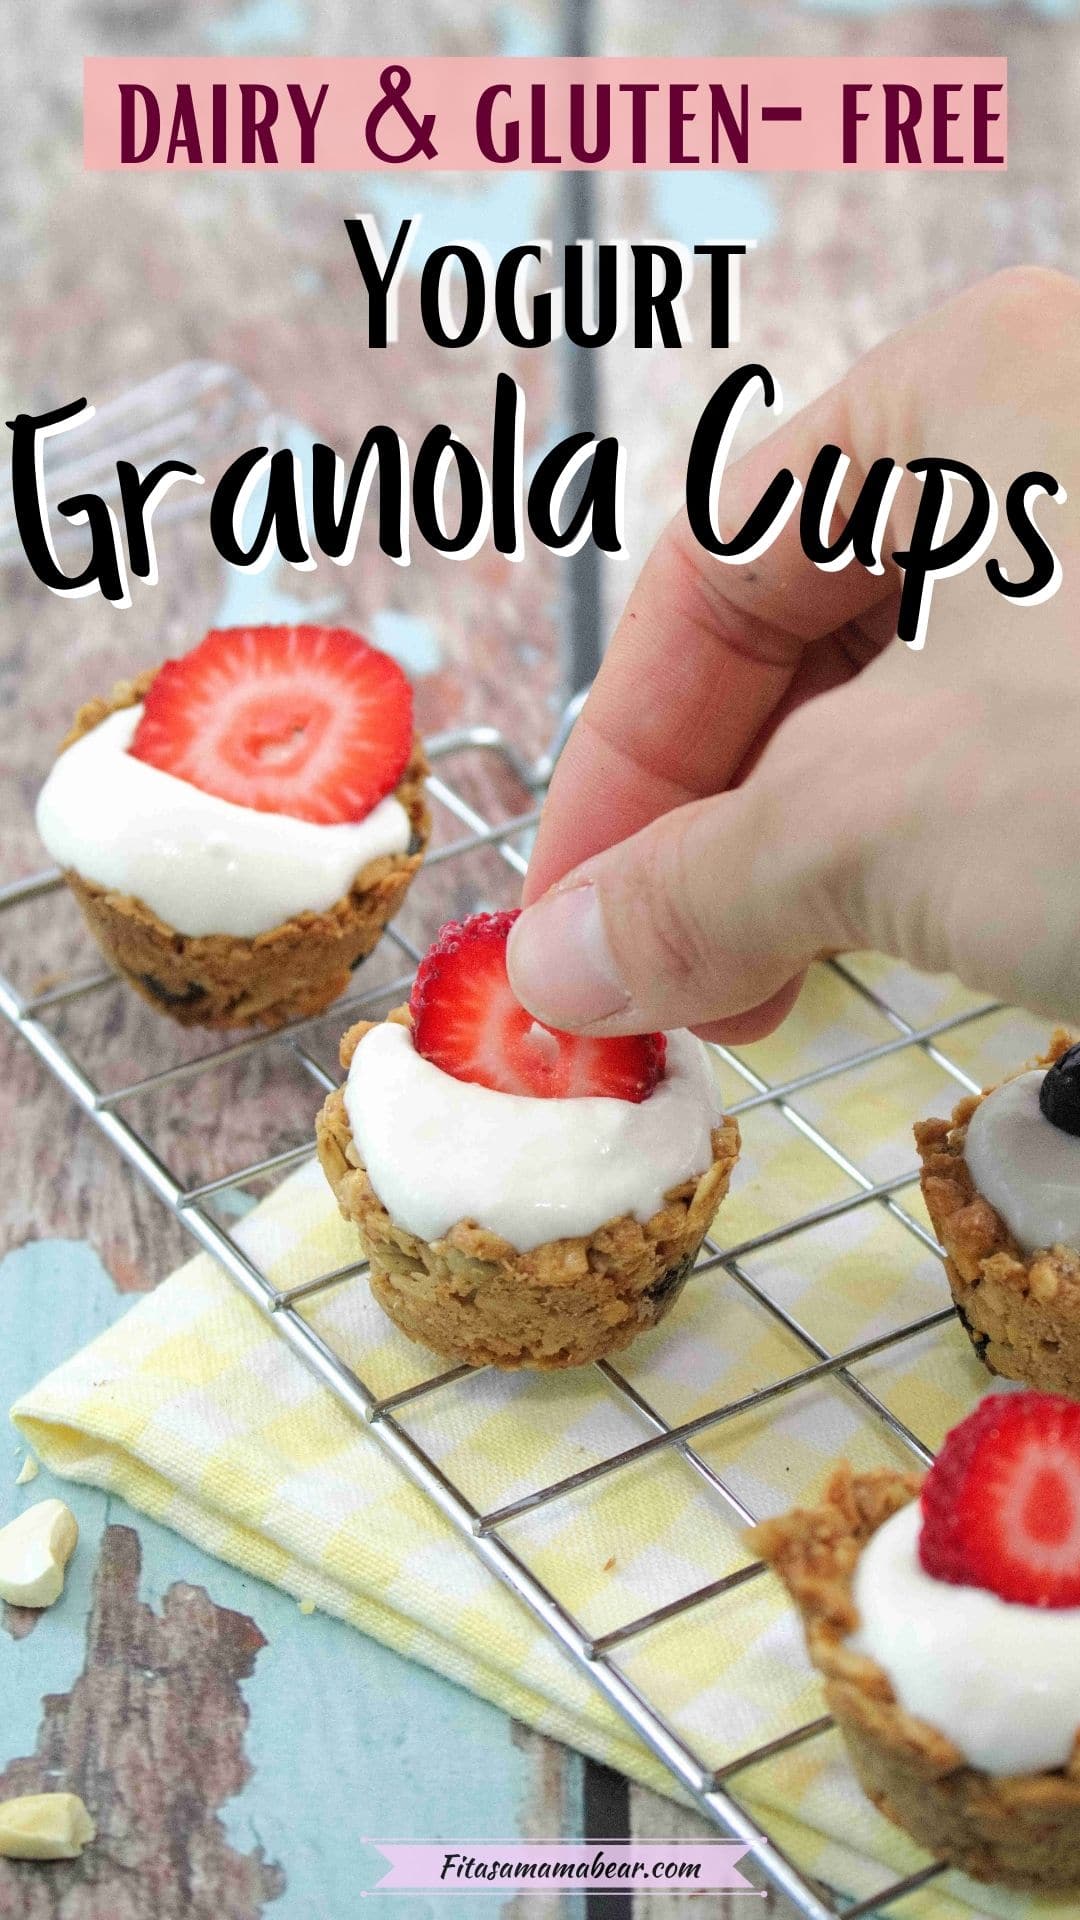 Pin image with text: A hand placing a slice if strawberry onto a granla cup with yogurt on top on a cooling rack with a yellow linen under it